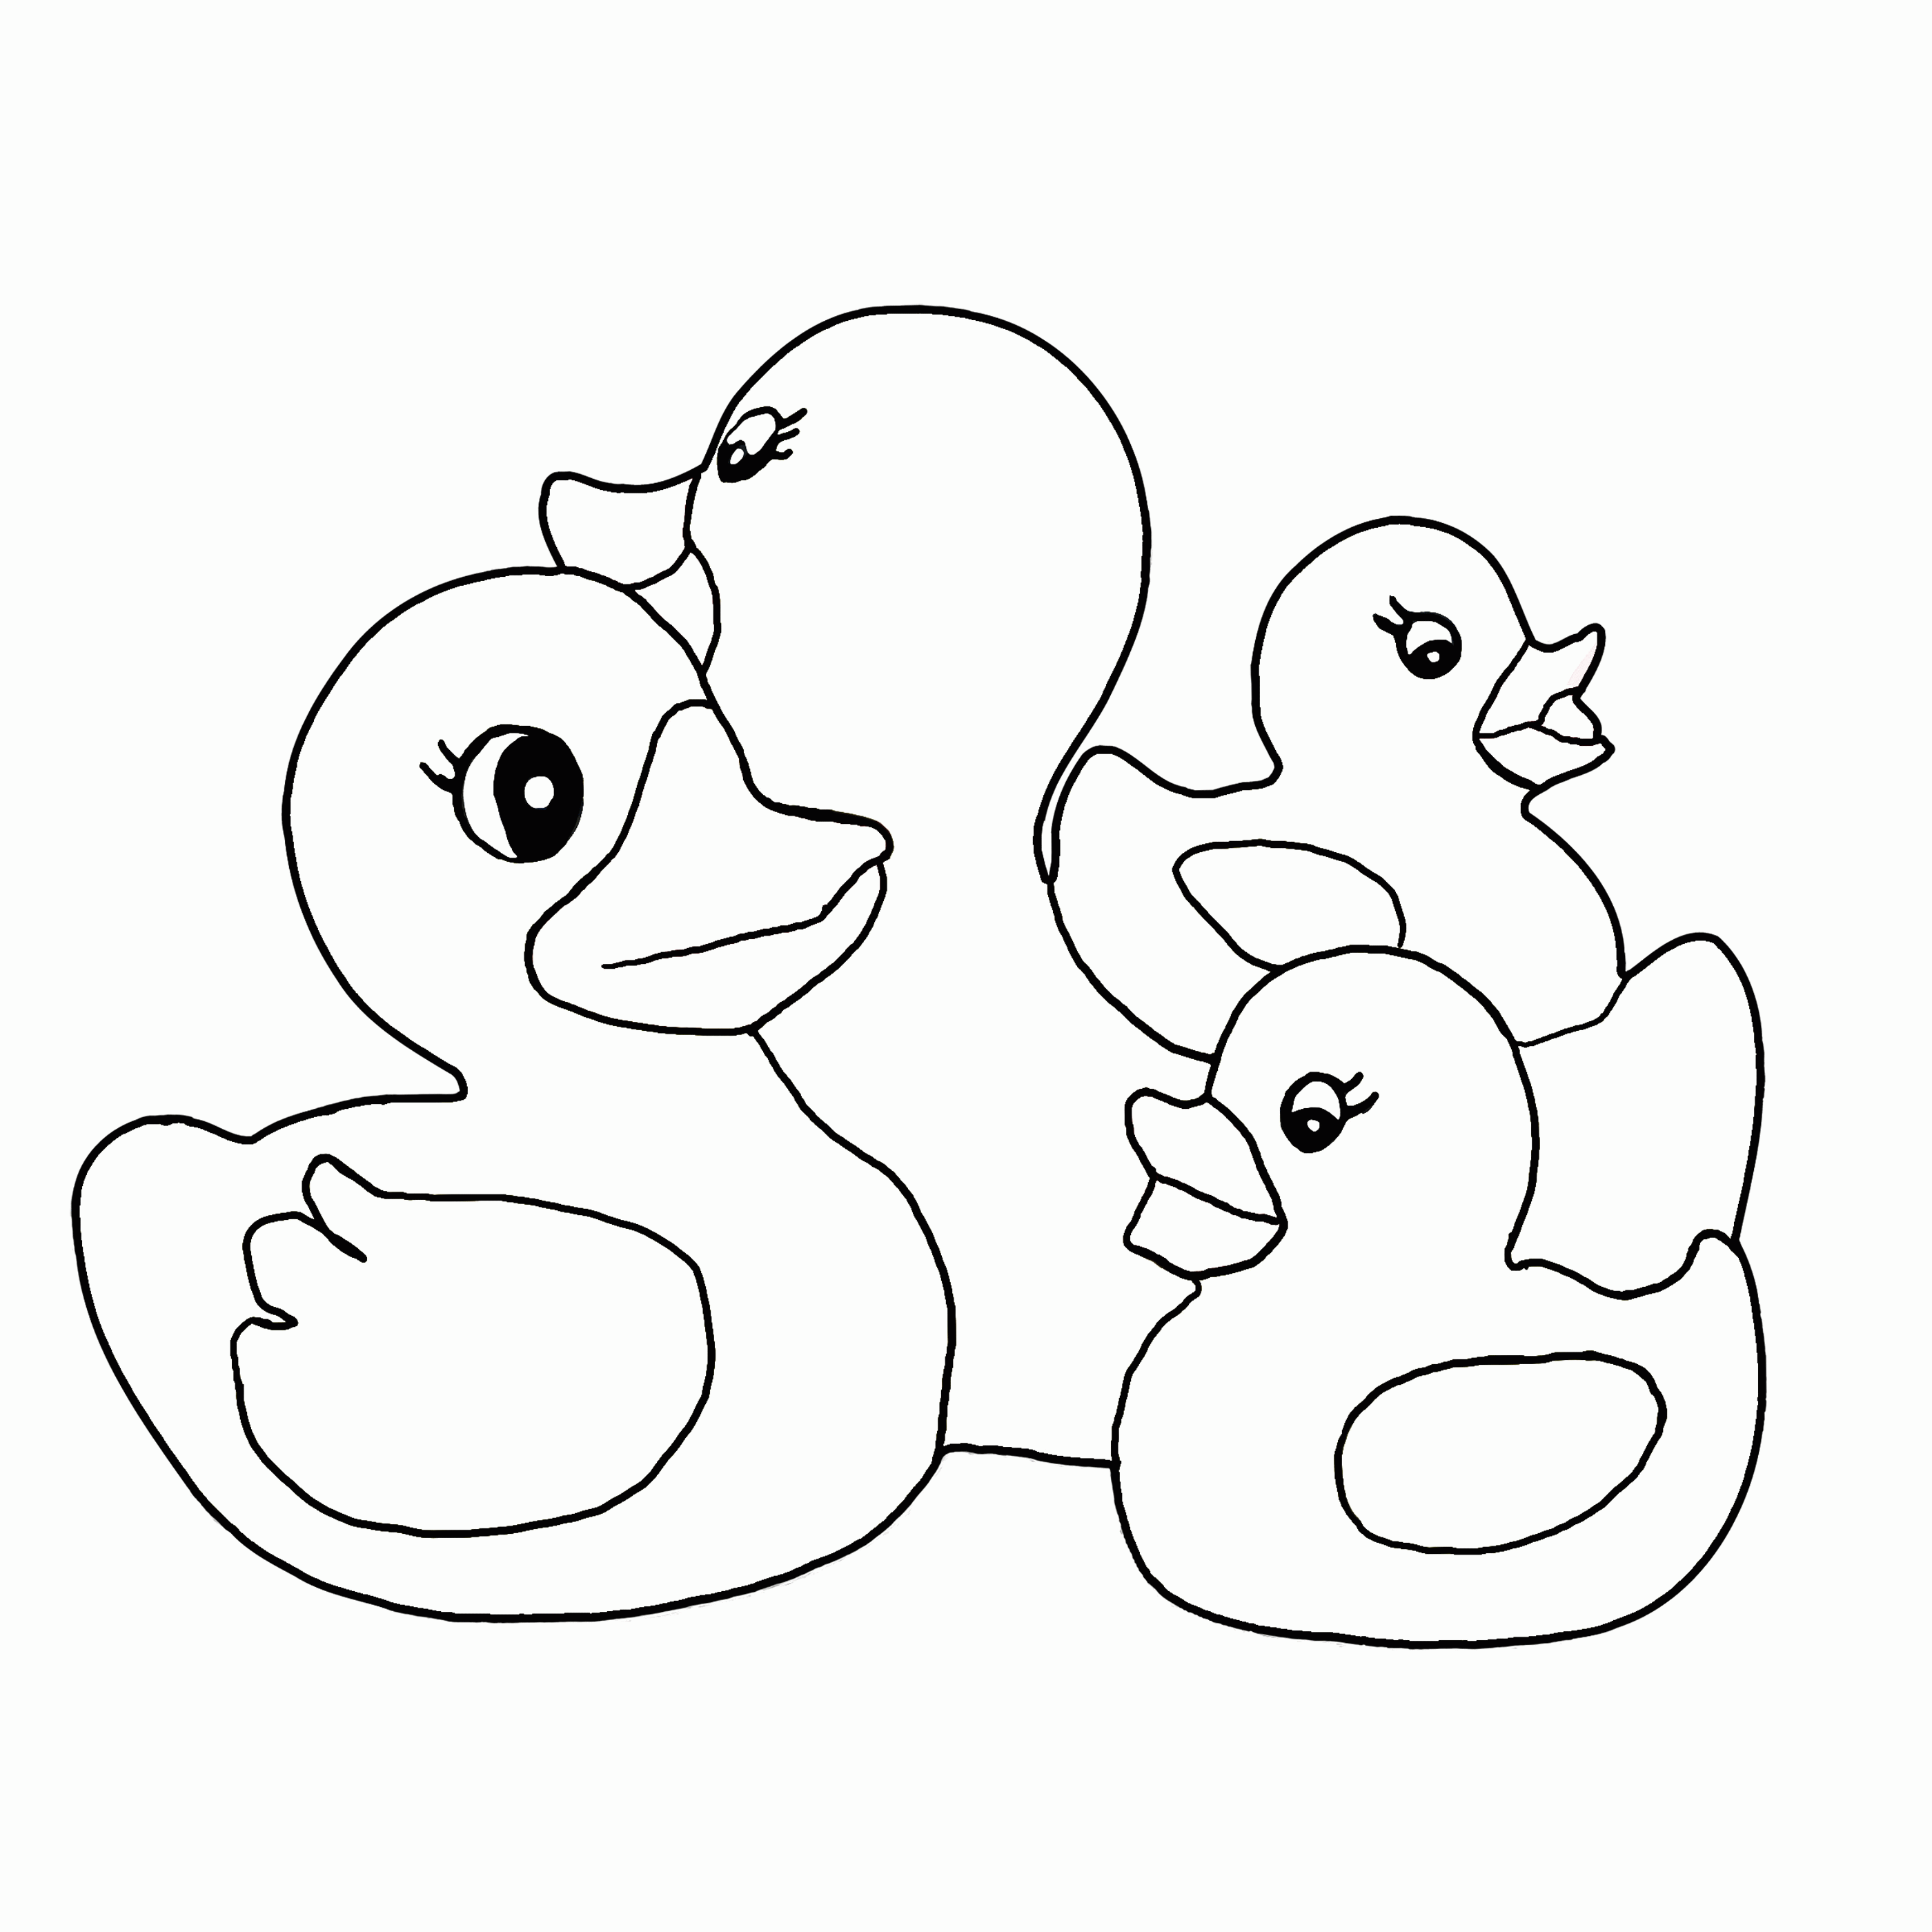 Duckling Colouring Sheets - High Quality Coloring Pages